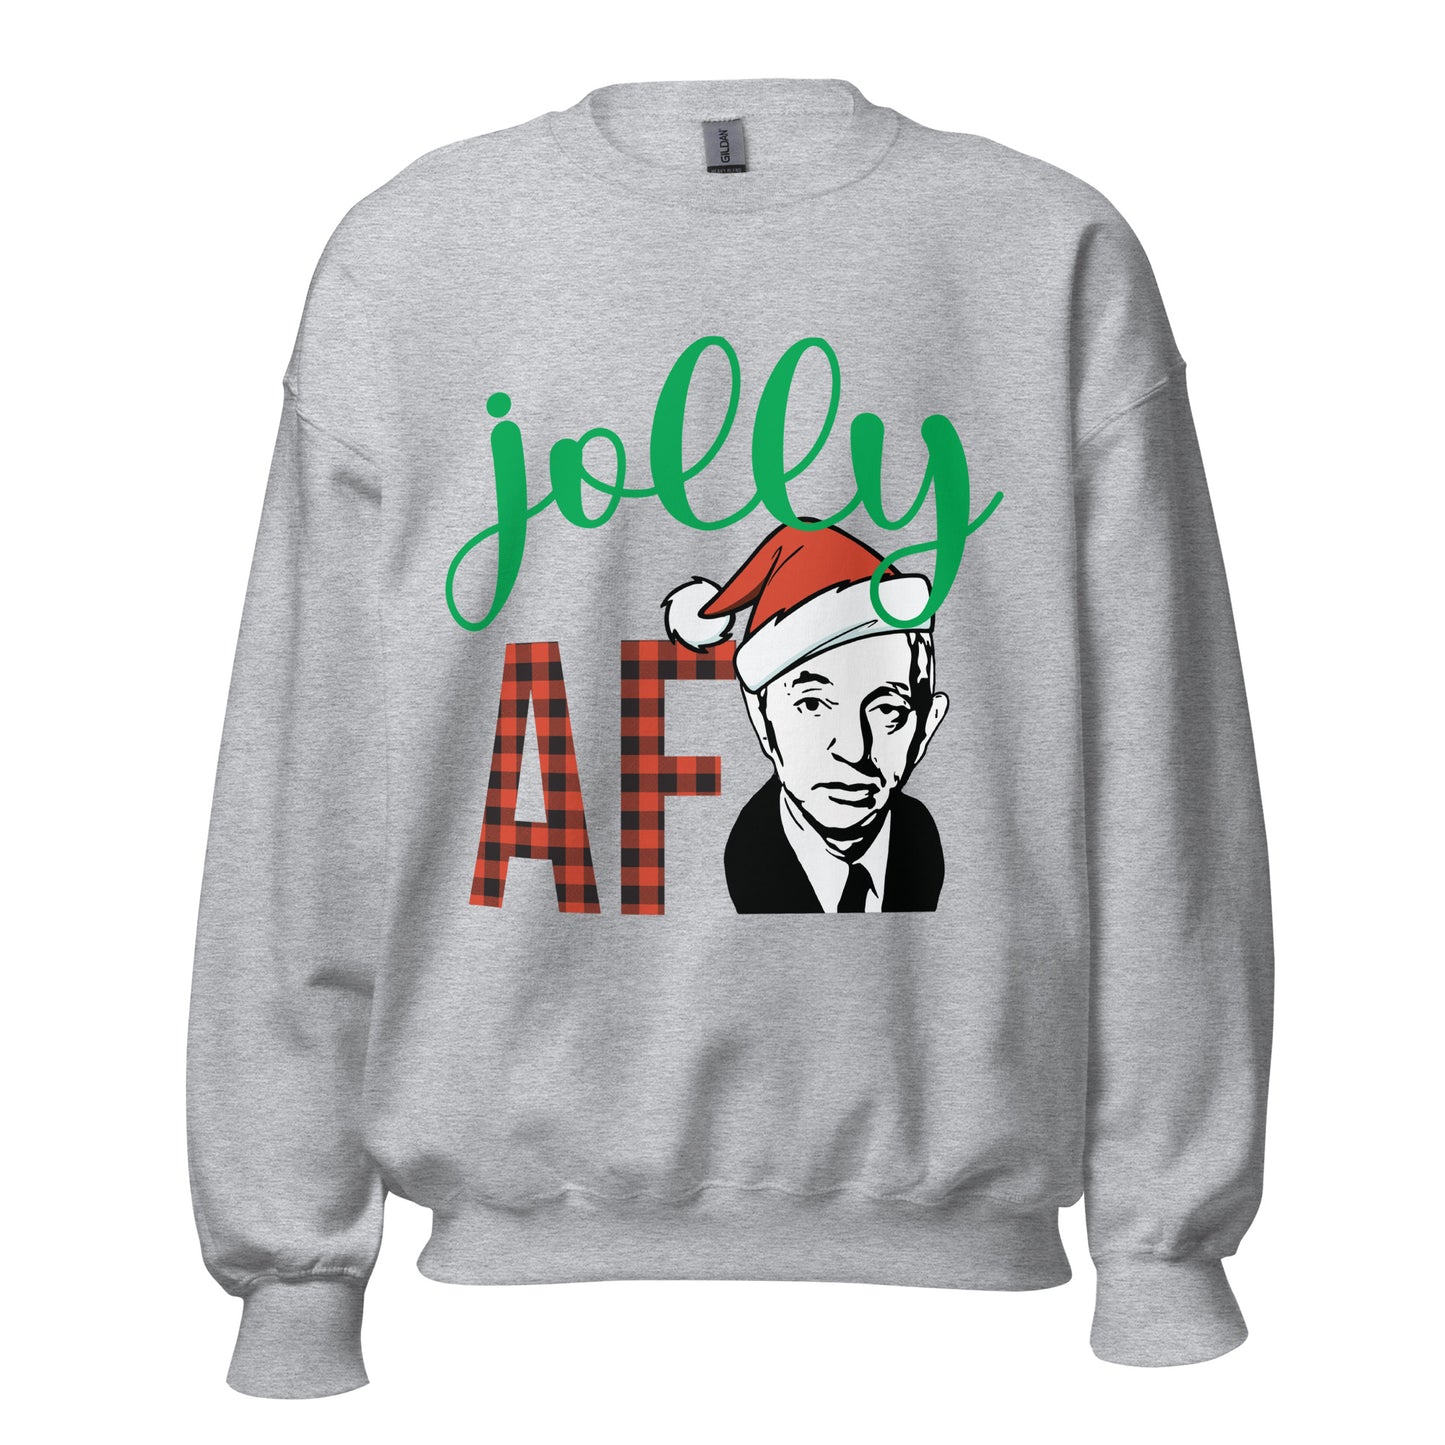 Permission to be Jolly